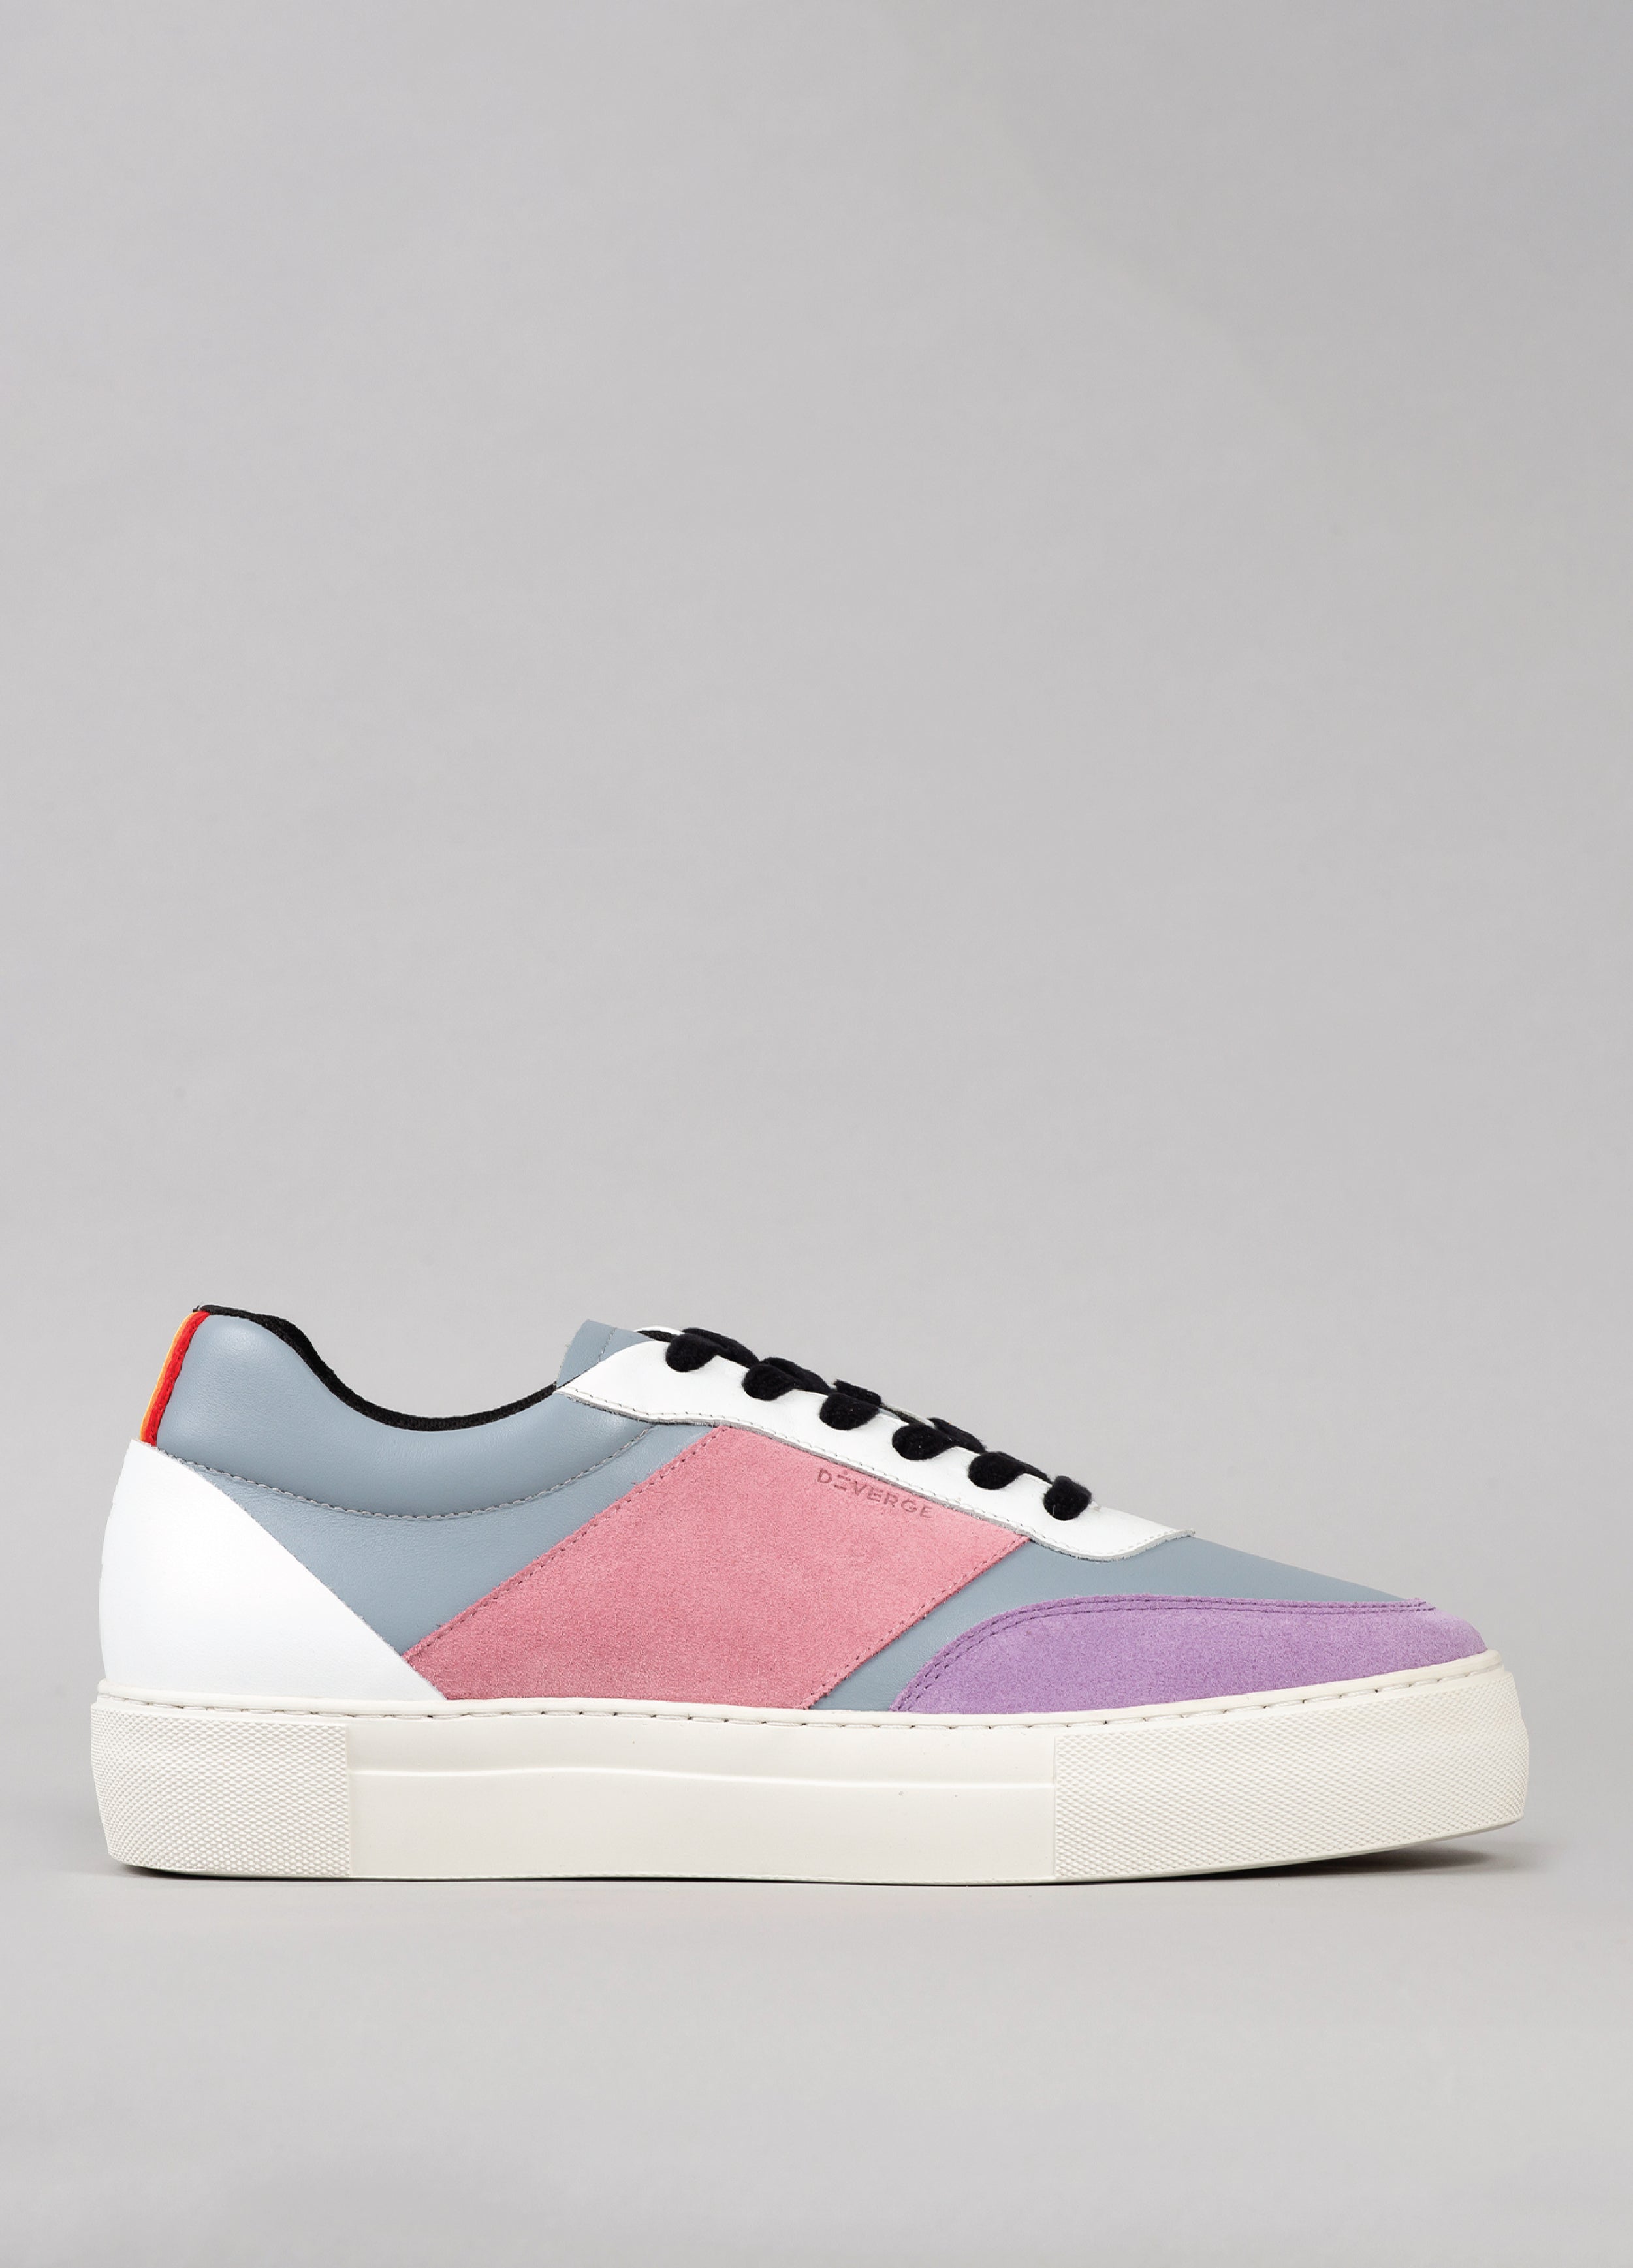 artic, lilac and pink premium leather sneakers in contemporary design sideview